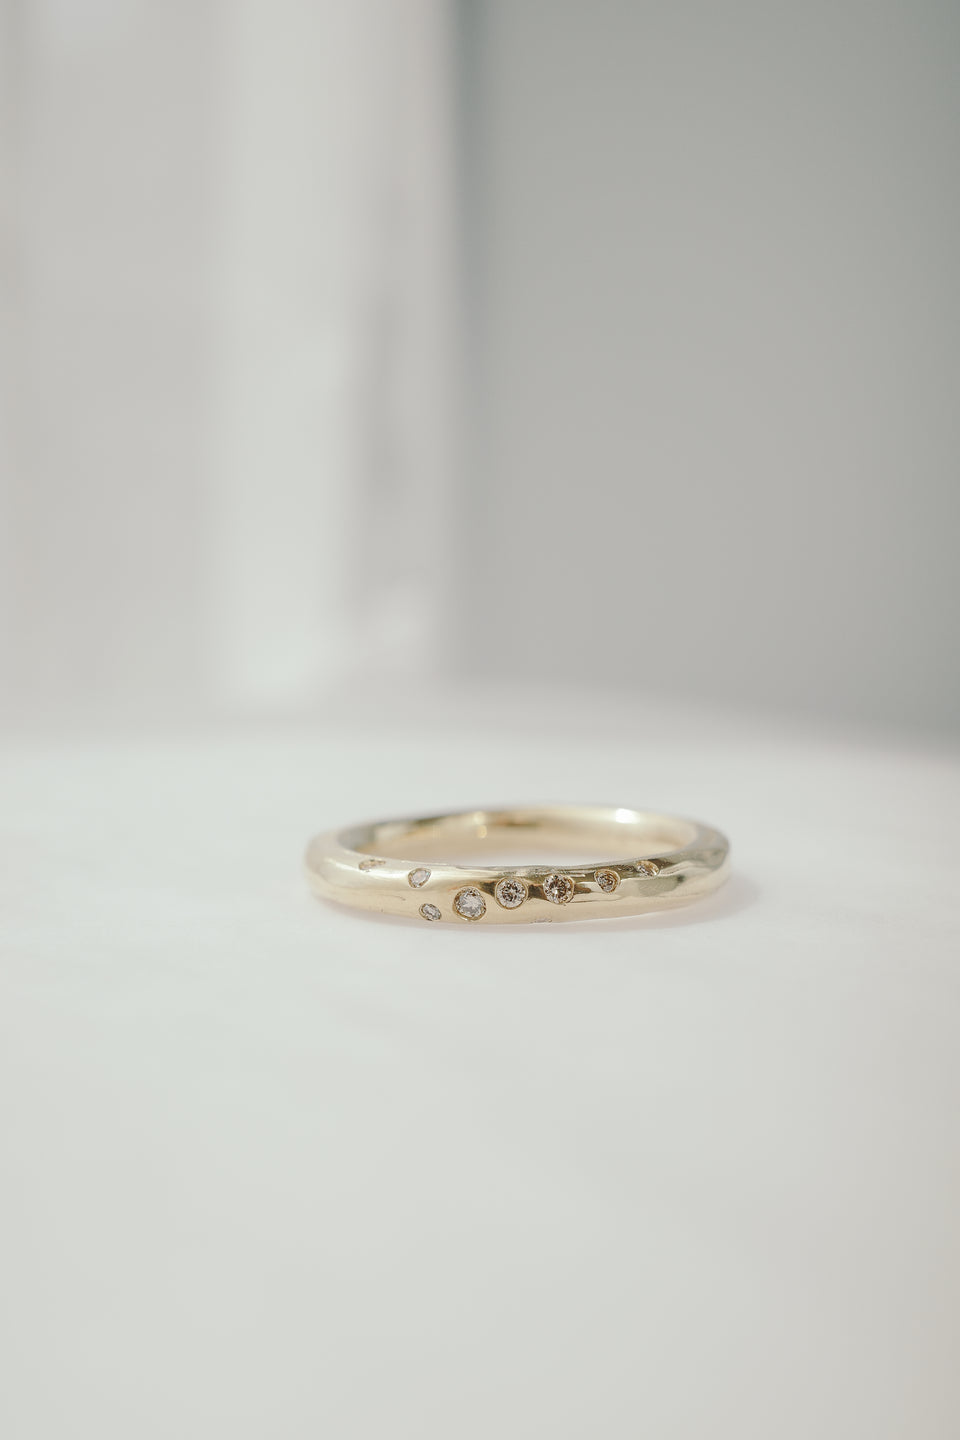 Orbital Round Band in Fairmined Gold with Champagne Diamonds